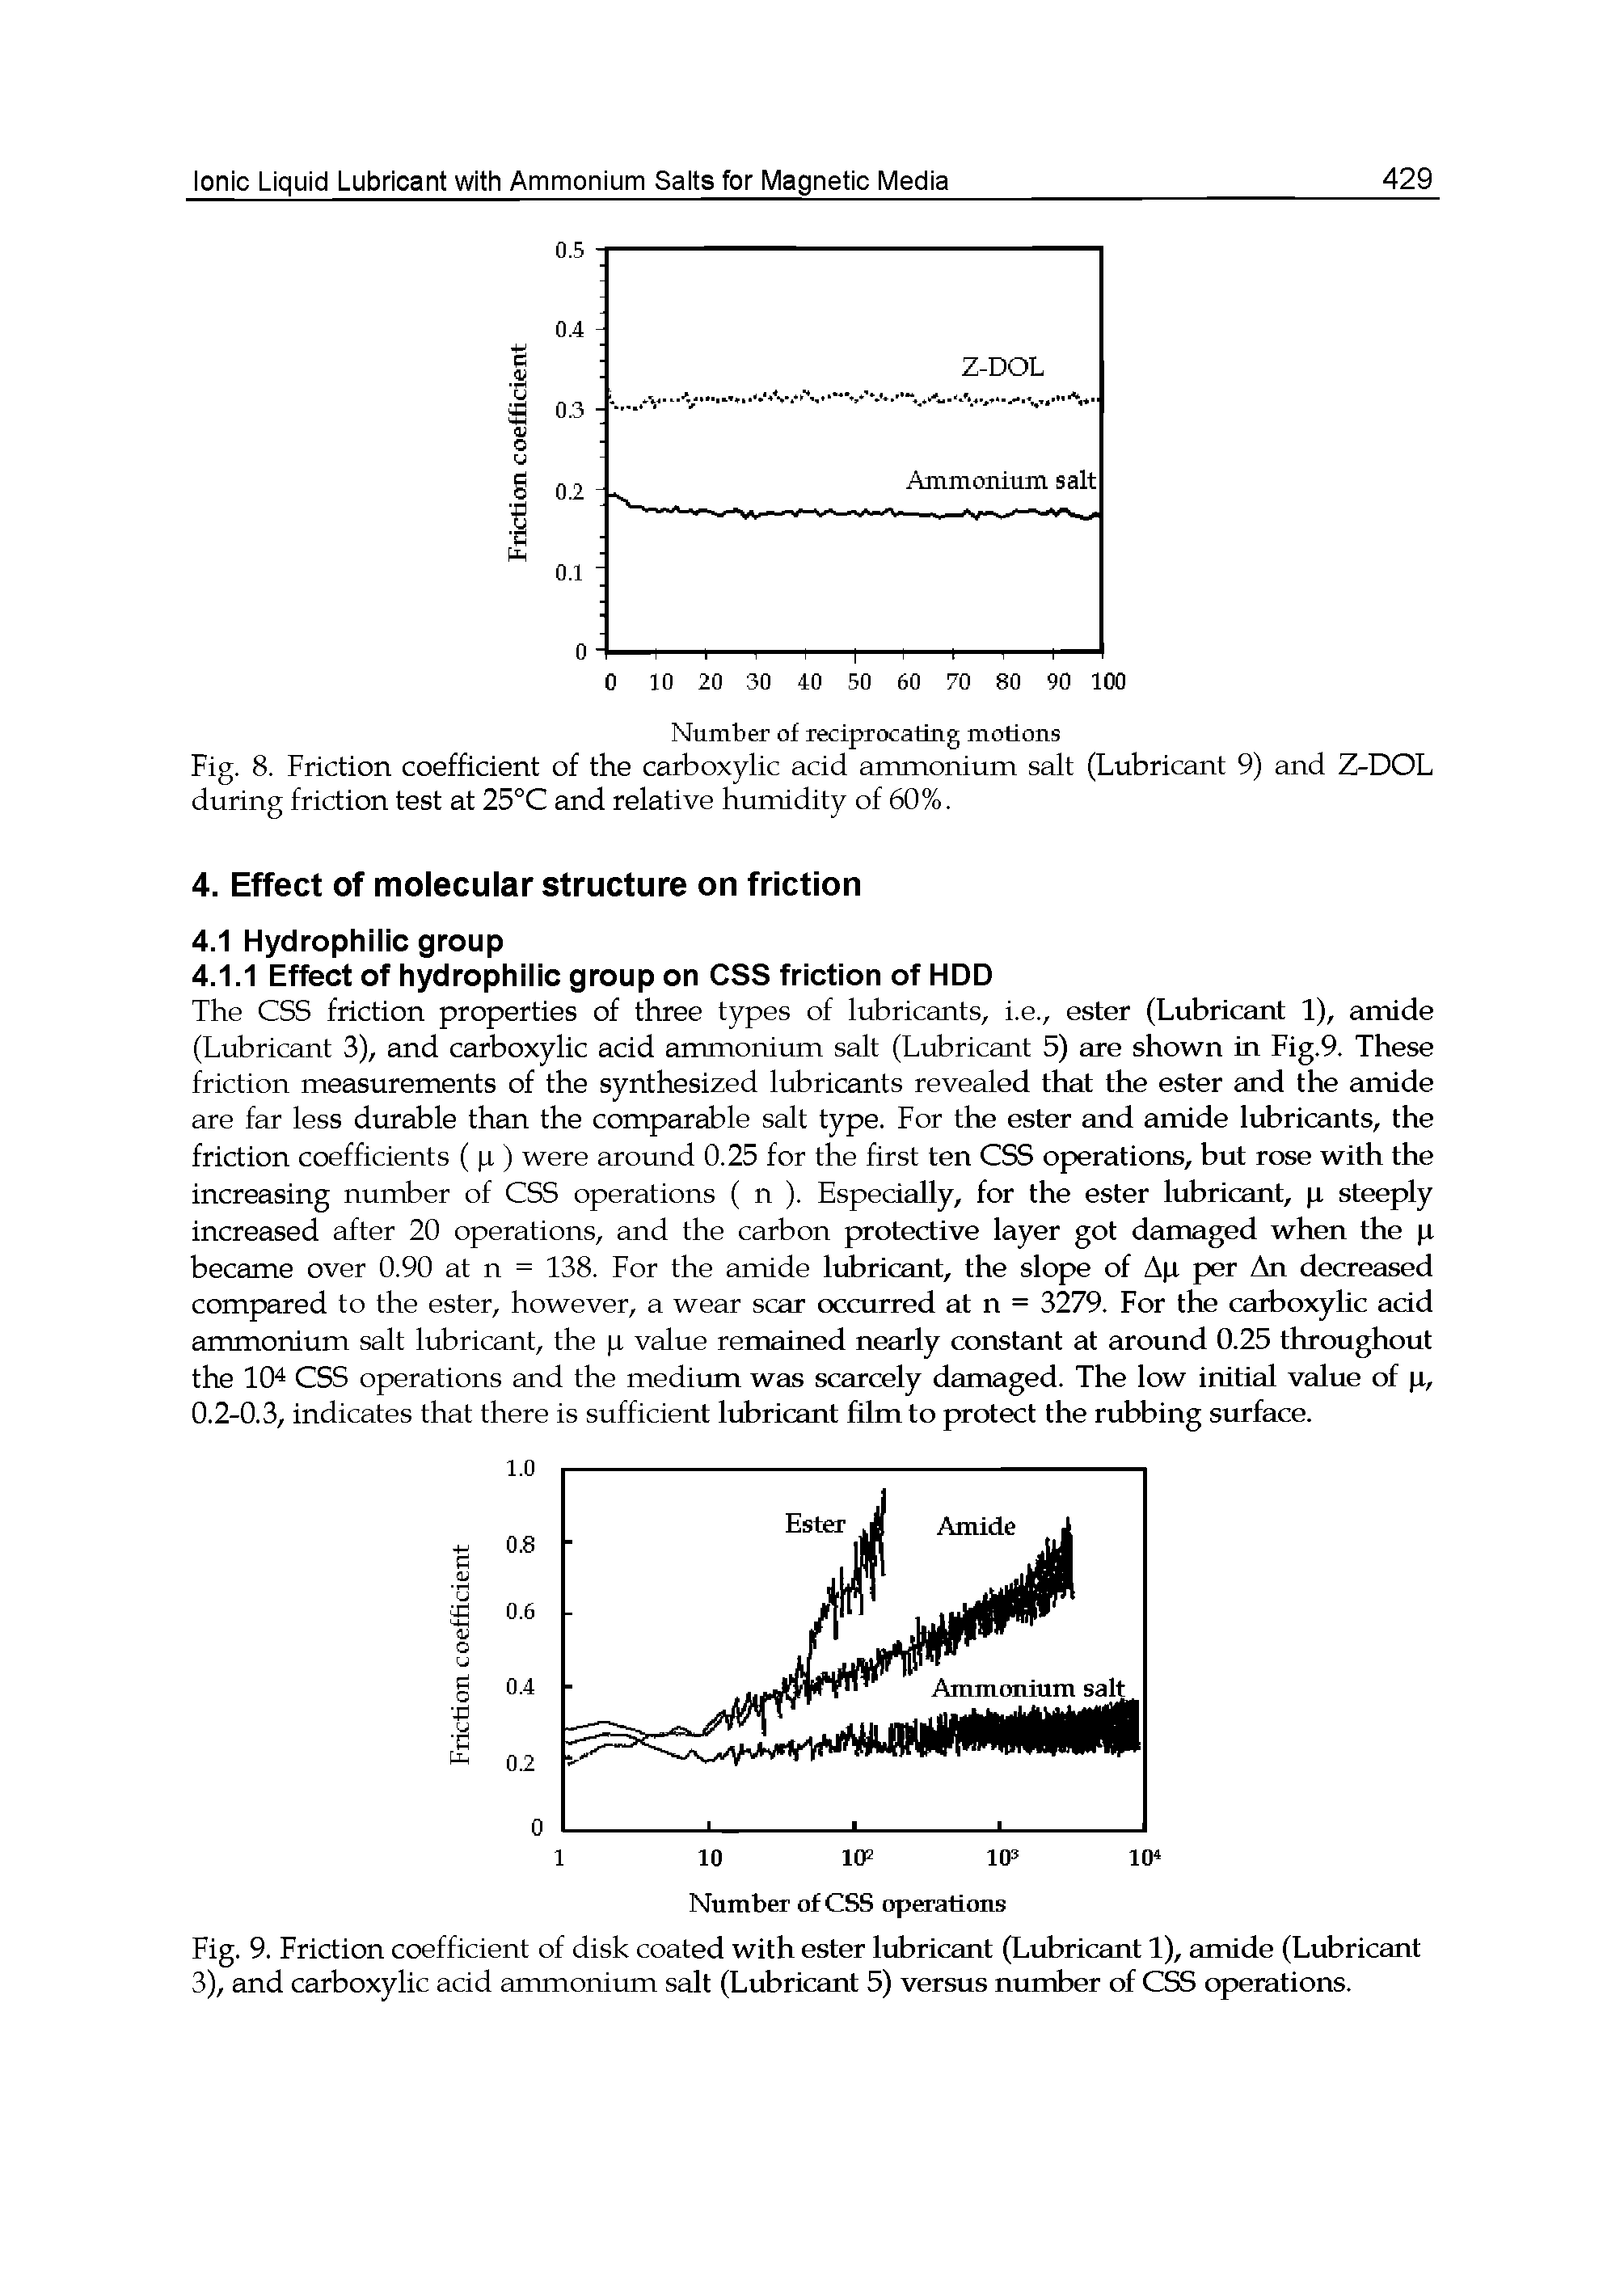 Fig. 8. Friction coefficient of the carboxylic acid ammonium salt (Lubricant 9) and Z-DOL during friction test at 25°C and relative humidity of 60%.